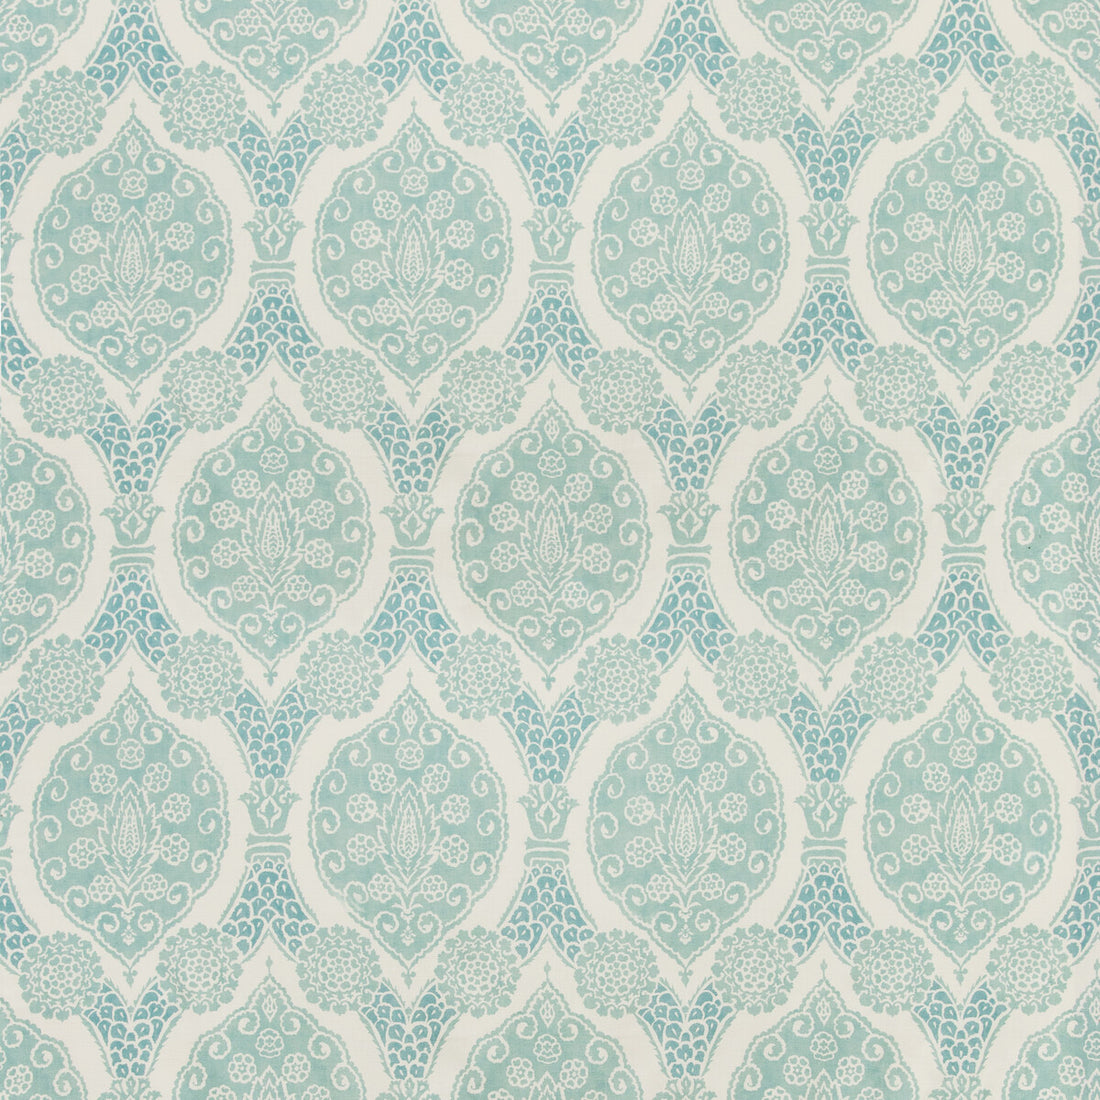 Sufera Print fabric in aqua color - pattern 8020103.13.0 - by Brunschwig &amp; Fils in the Grand Bazaar collection